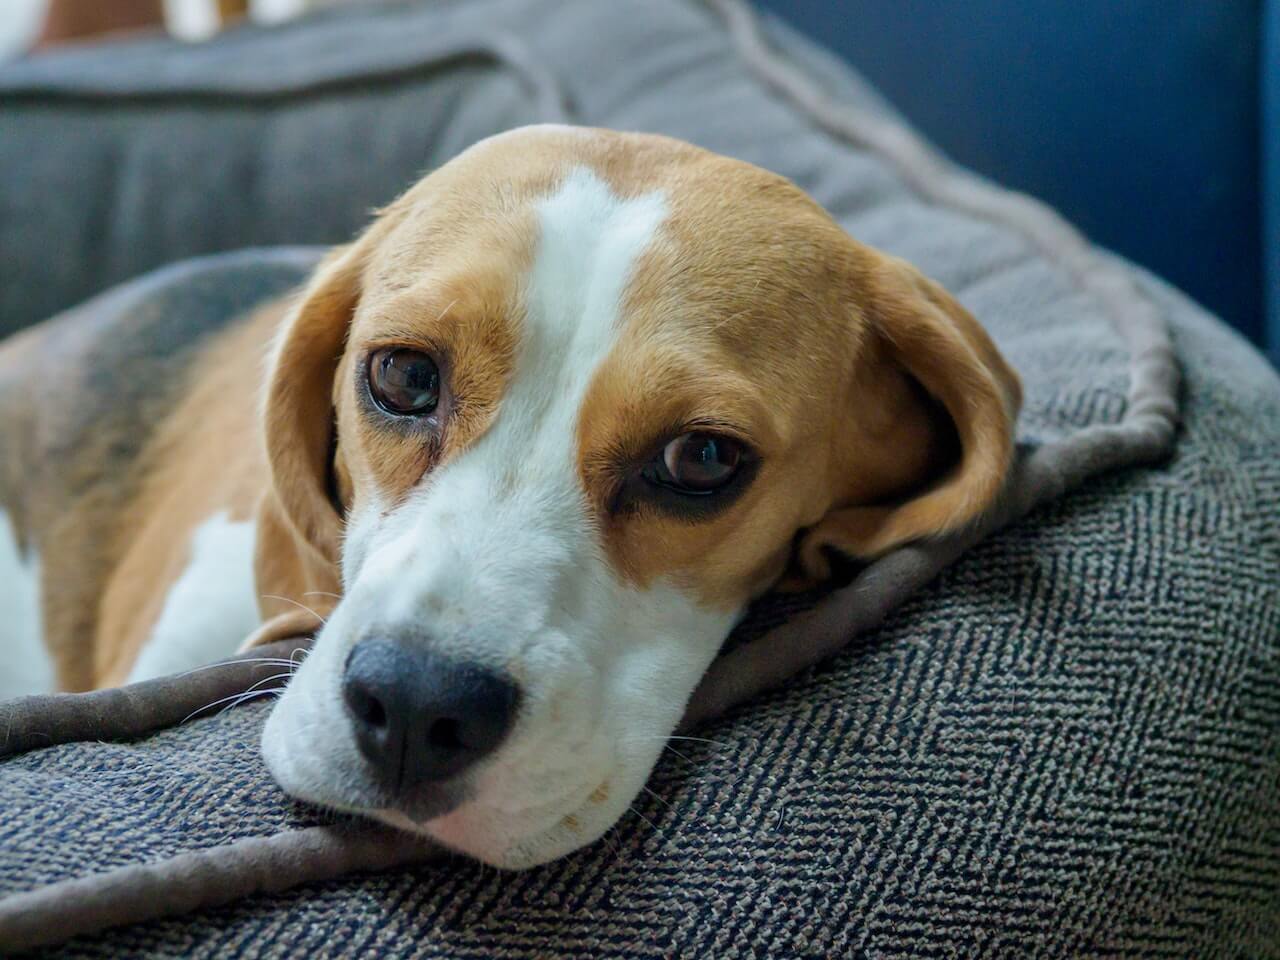 Why Beagles are the Worst Dogs?